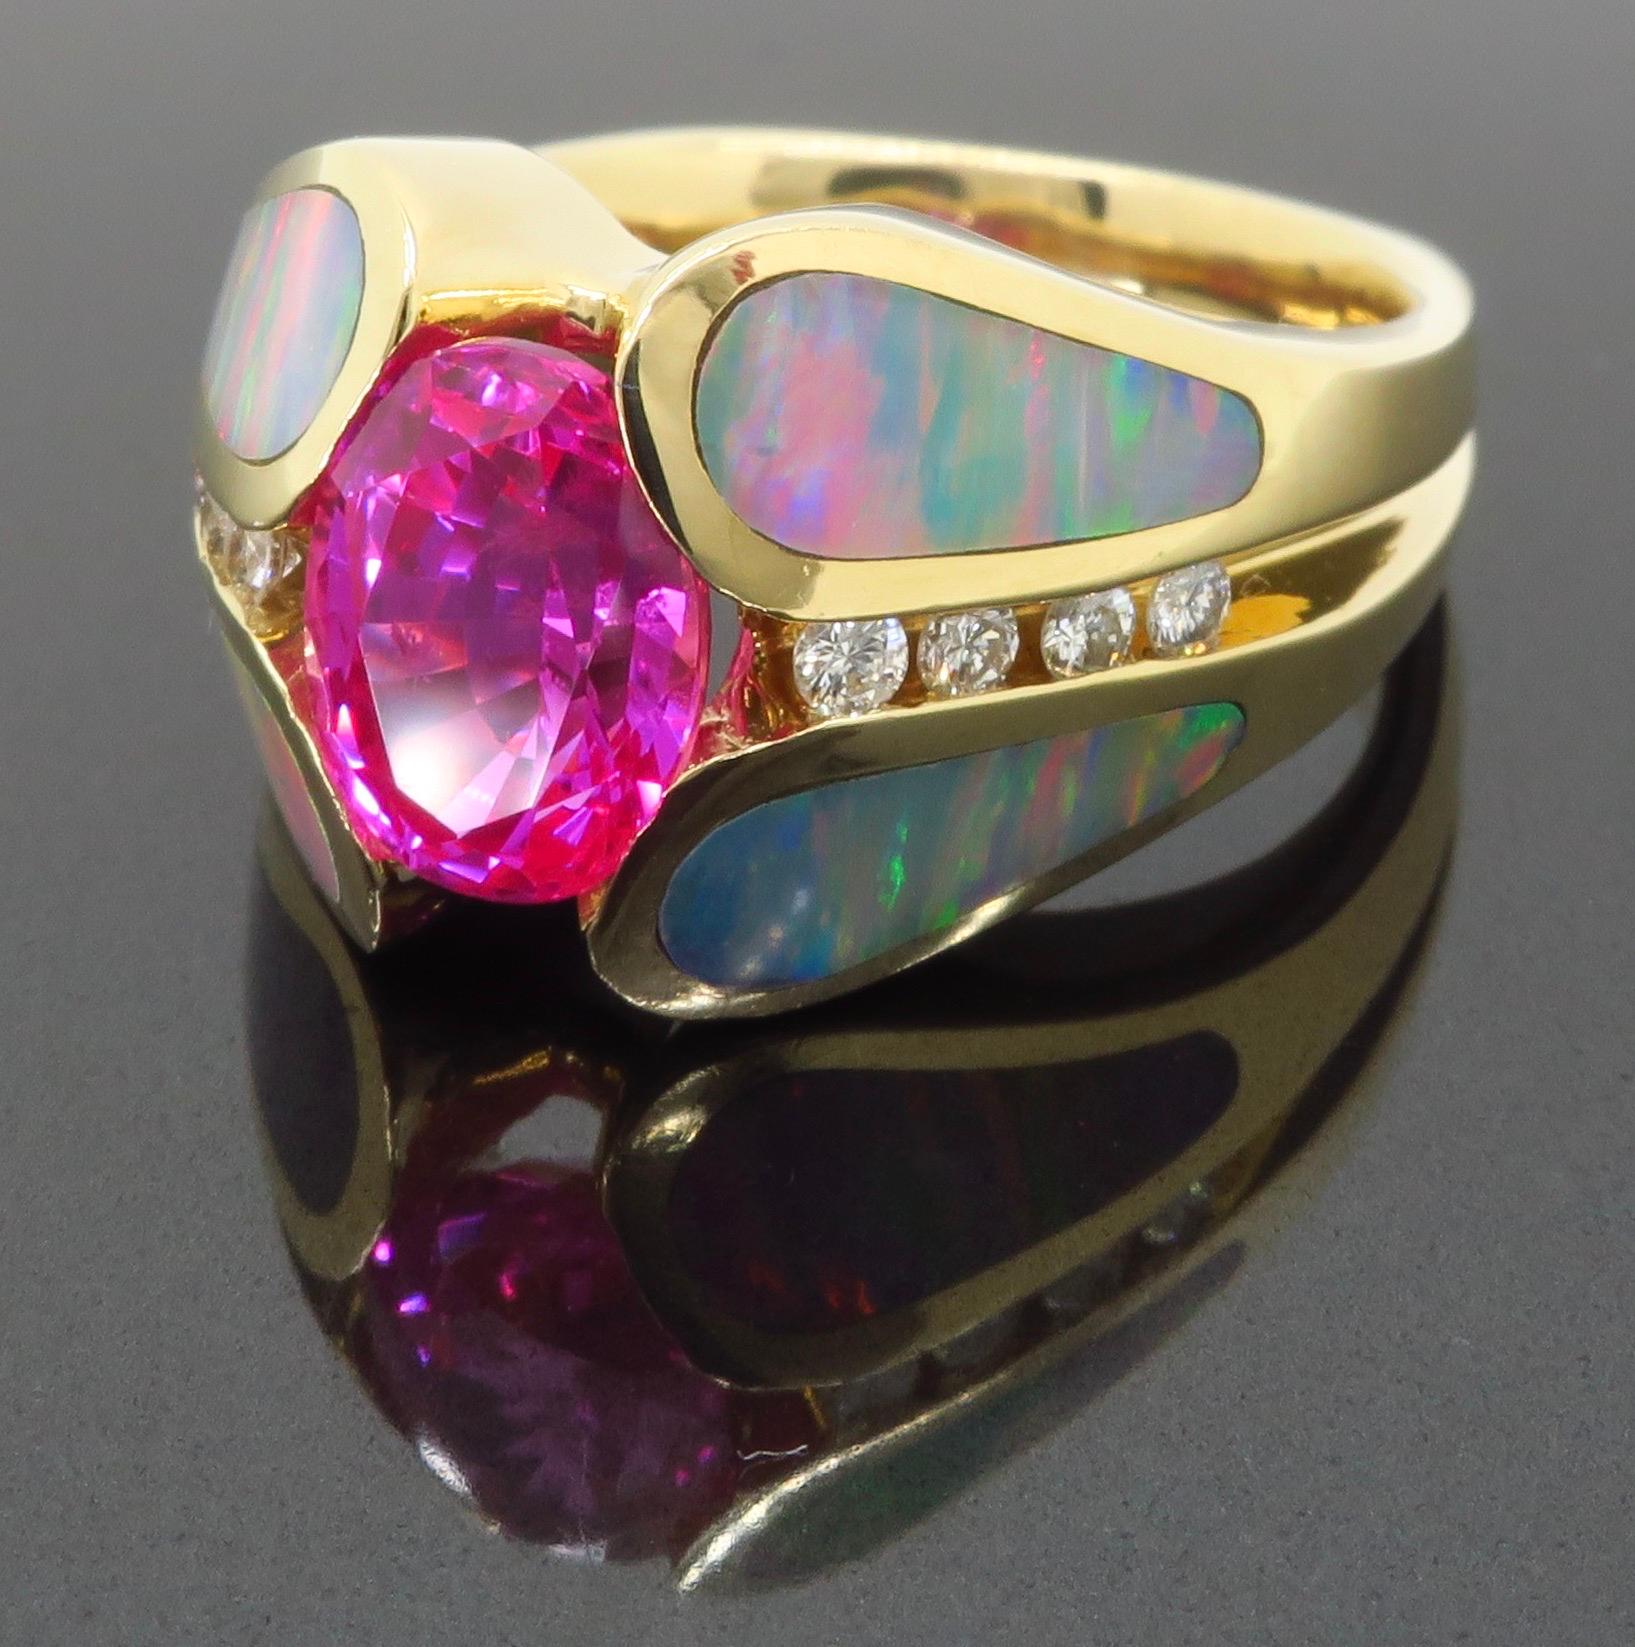 Oval Cut Pink Sapphire Diamond and Opal Ring Made in 14 Karat Yellow Gold